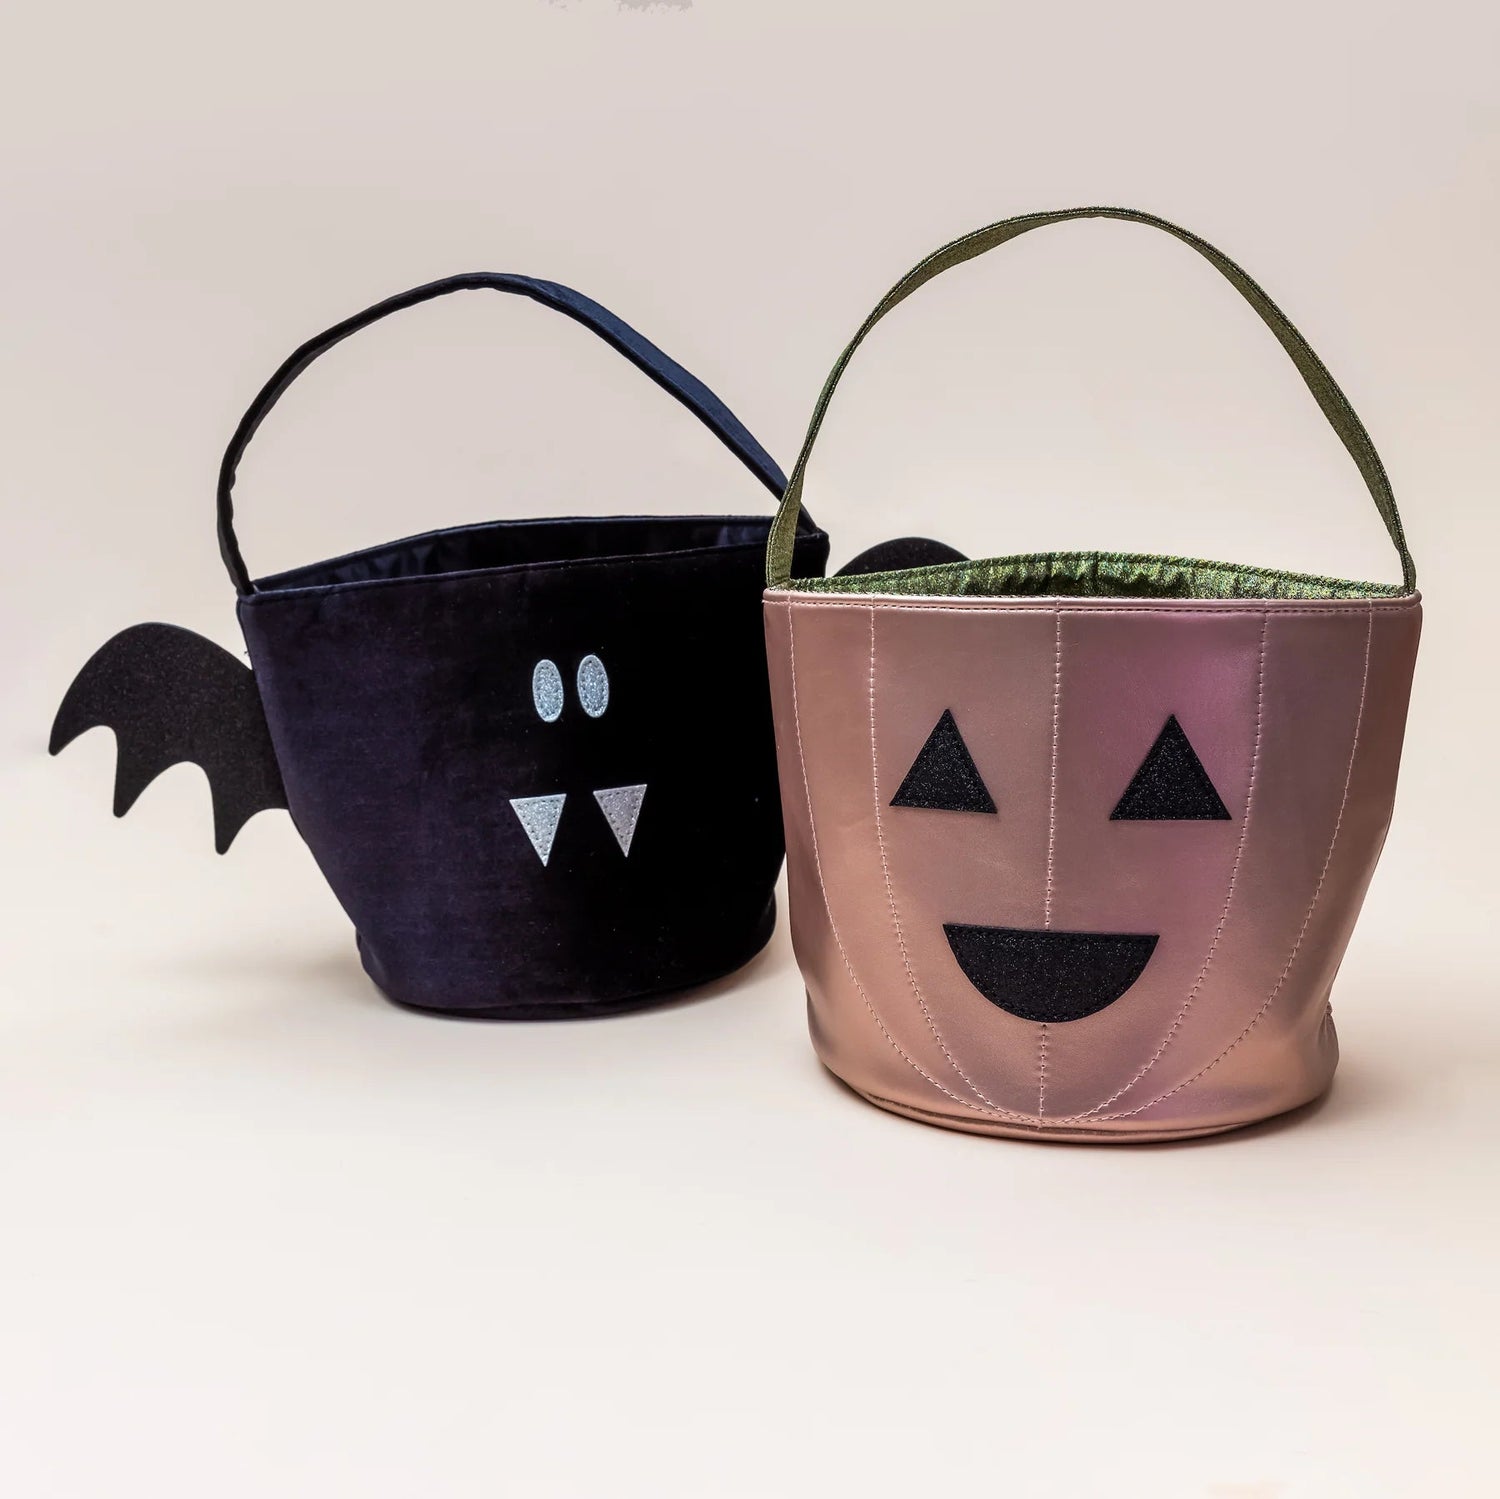 MIMI & LULA | BAT TRICK-OR-TREAT BAG *PRE-ORDER* by MIMI & LULA - The Playful Collective